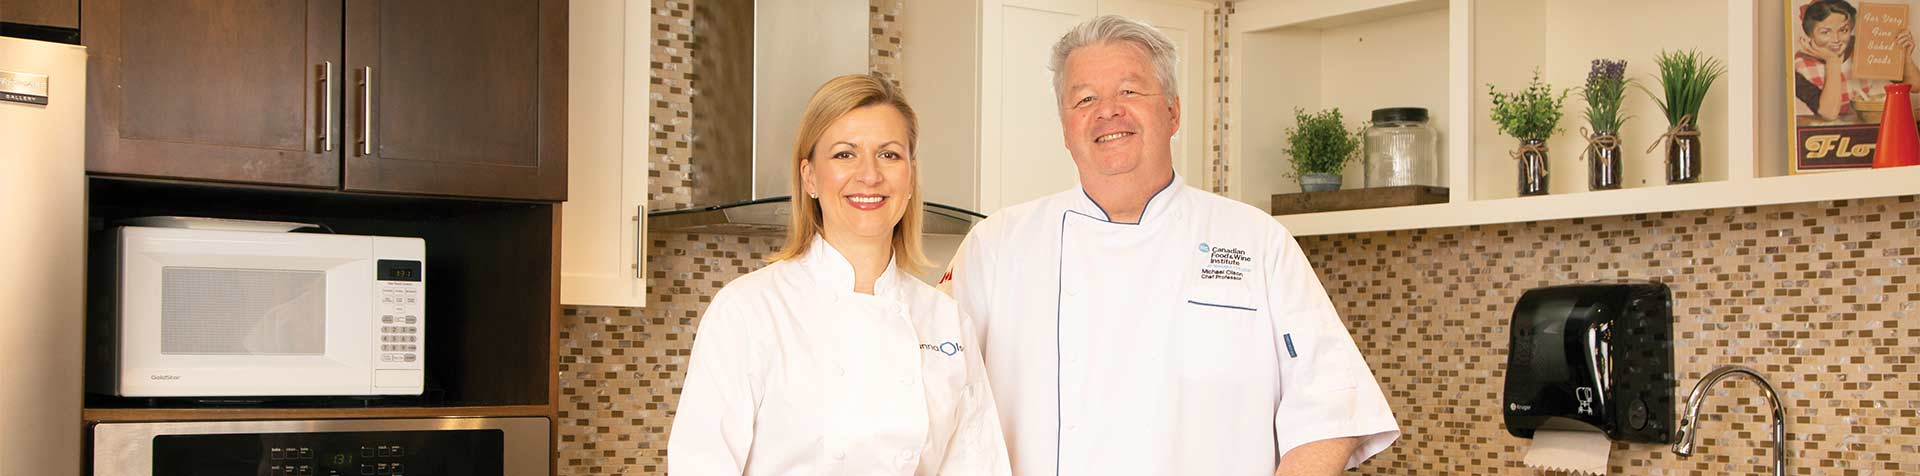 Chefs Michael and Anna Olson in the Seasons kitchen